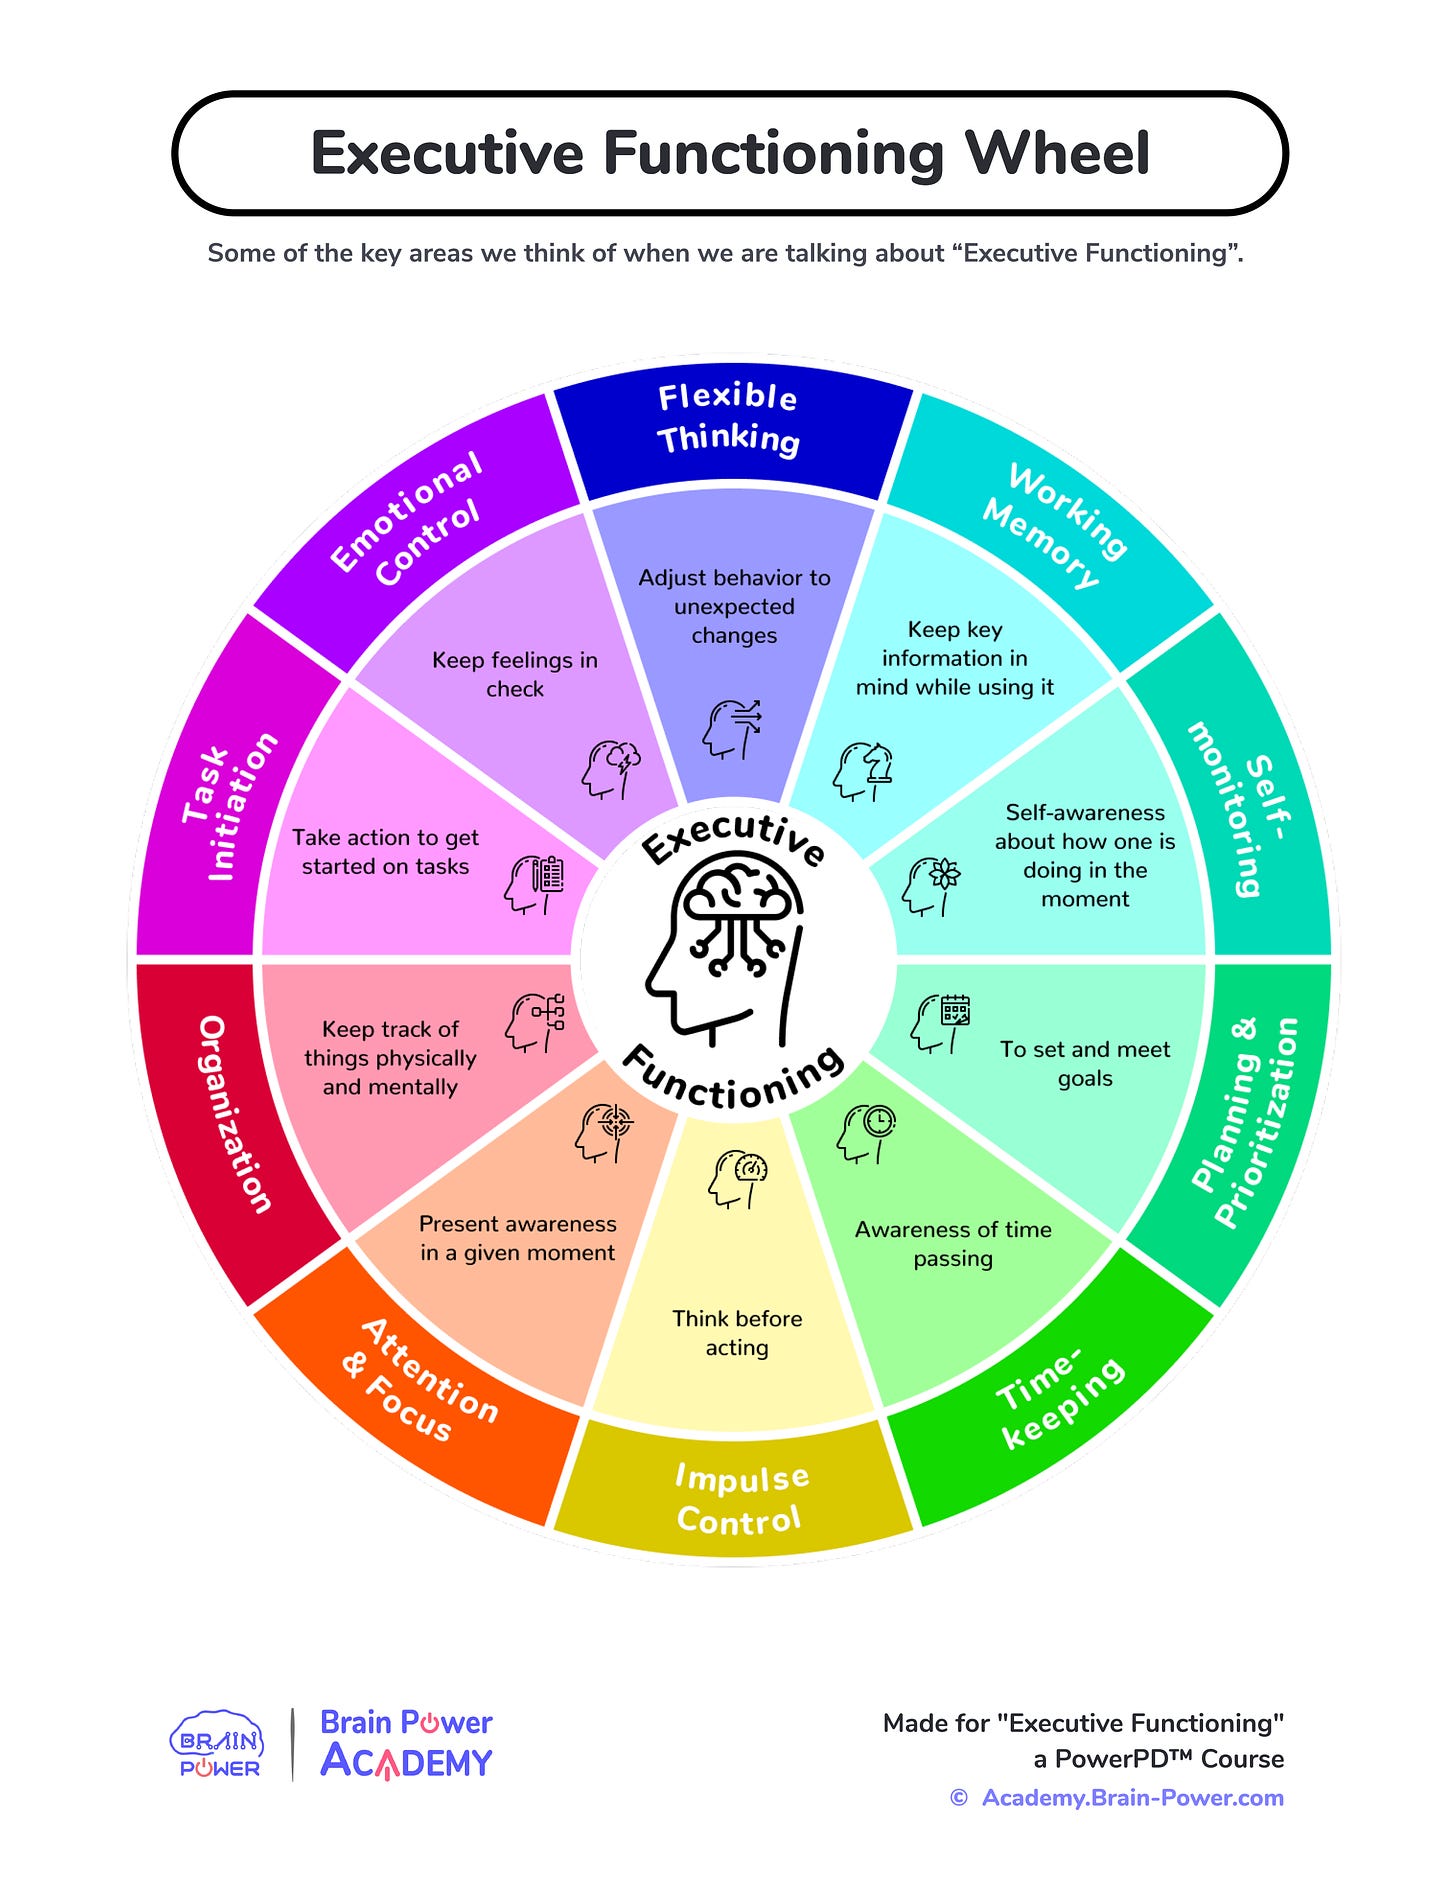 A wheel that shows the 12 domains of executive function.